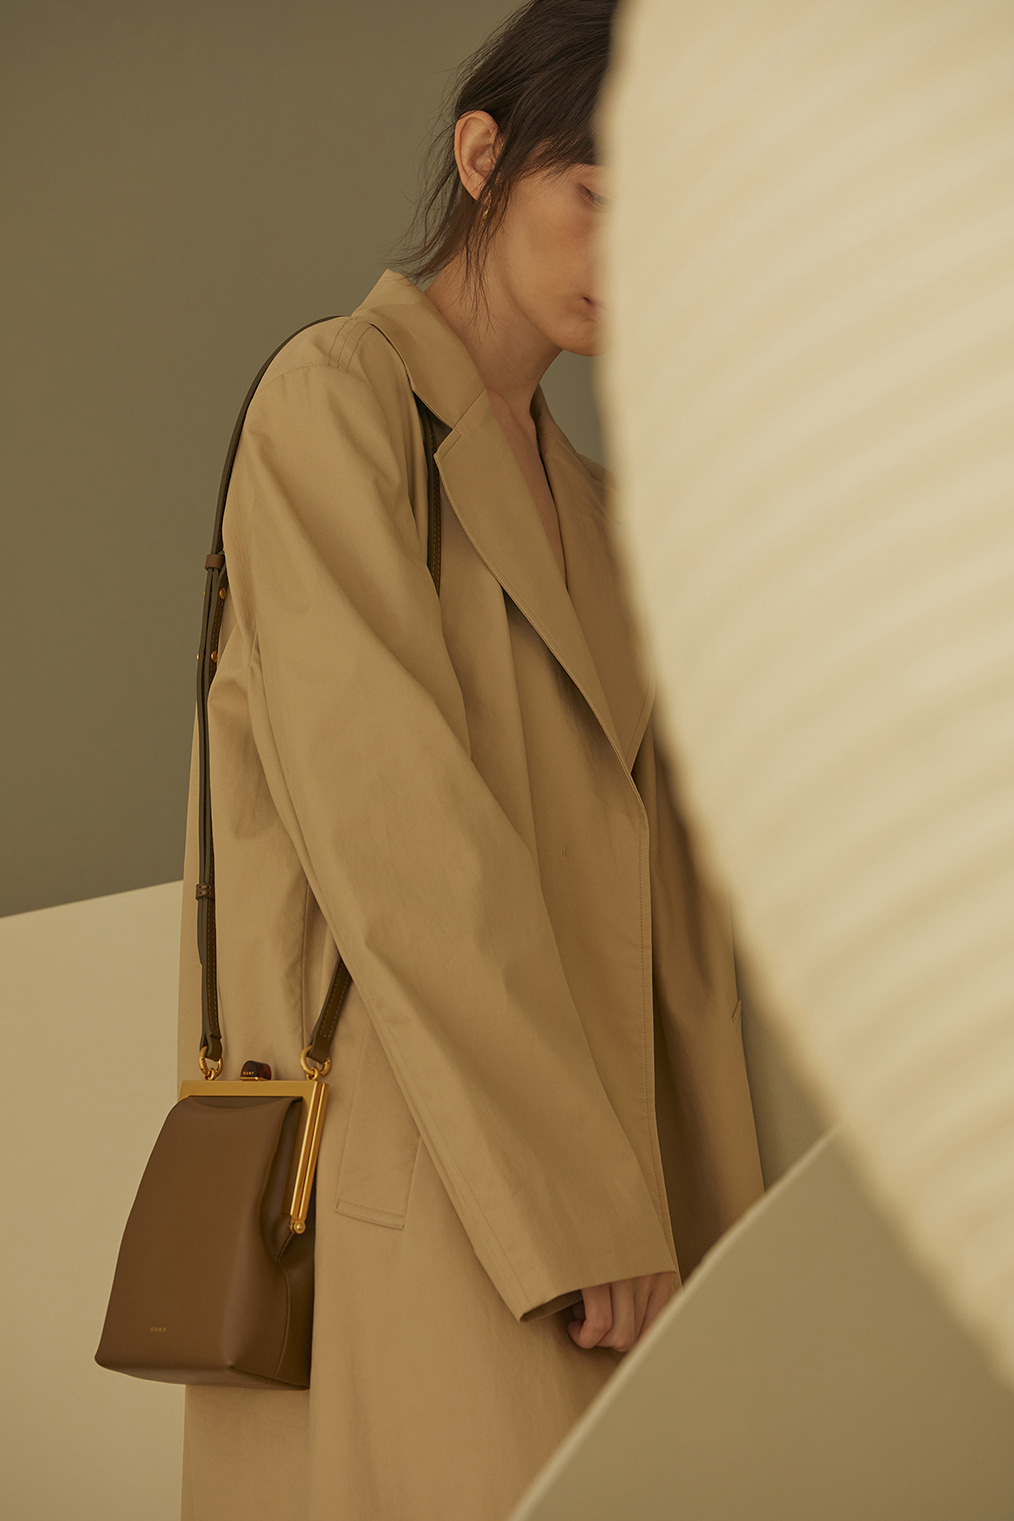 [New Color] Vieve Mini Bag _ Olive Brown